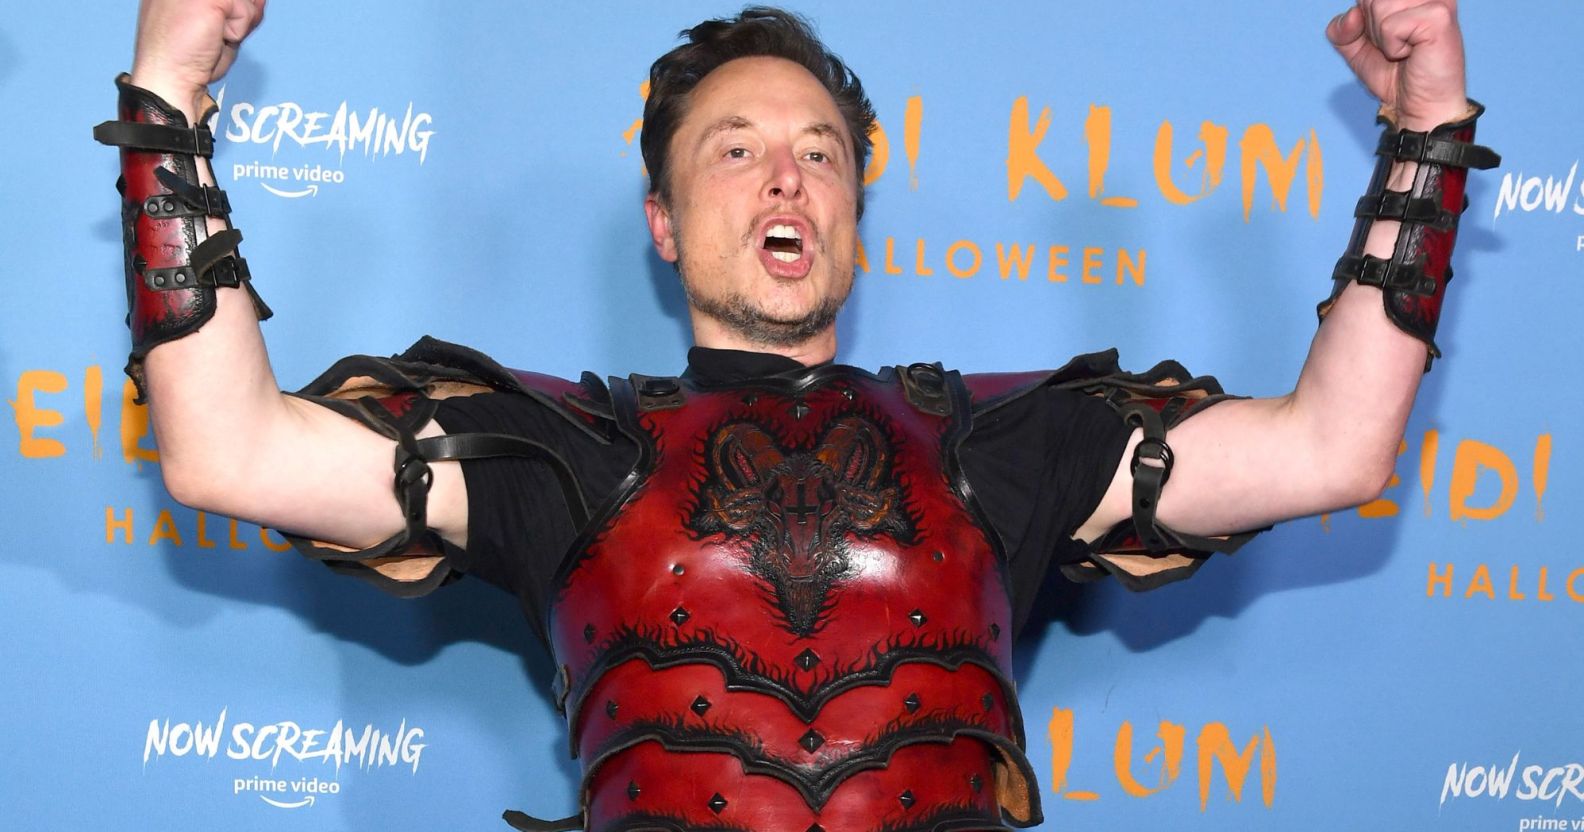 Elon Musk, wearing a red suit of armour, raises his arms and screams.